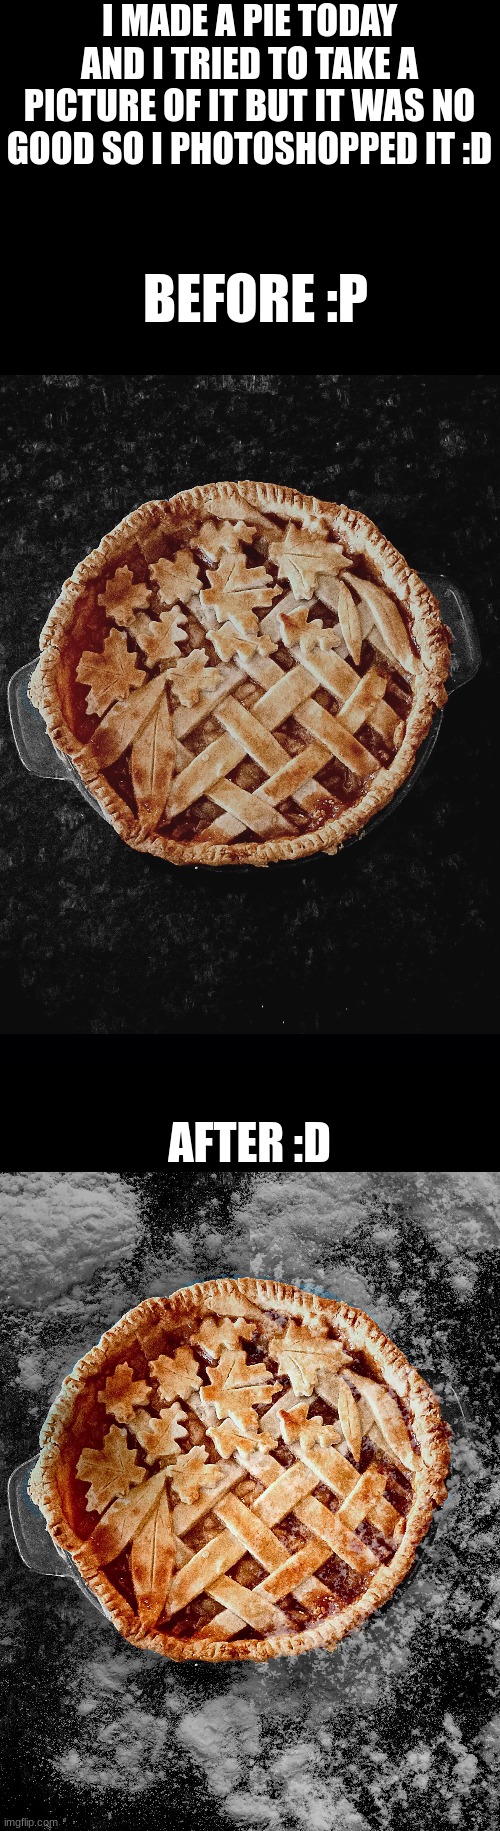 whatchu think :D | I MADE A PIE TODAY AND I TRIED TO TAKE A PICTURE OF IT BUT IT WAS NO GOOD SO I PHOTOSHOPPED IT :D; BEFORE :P; AFTER :D | image tagged in black background | made w/ Imgflip meme maker